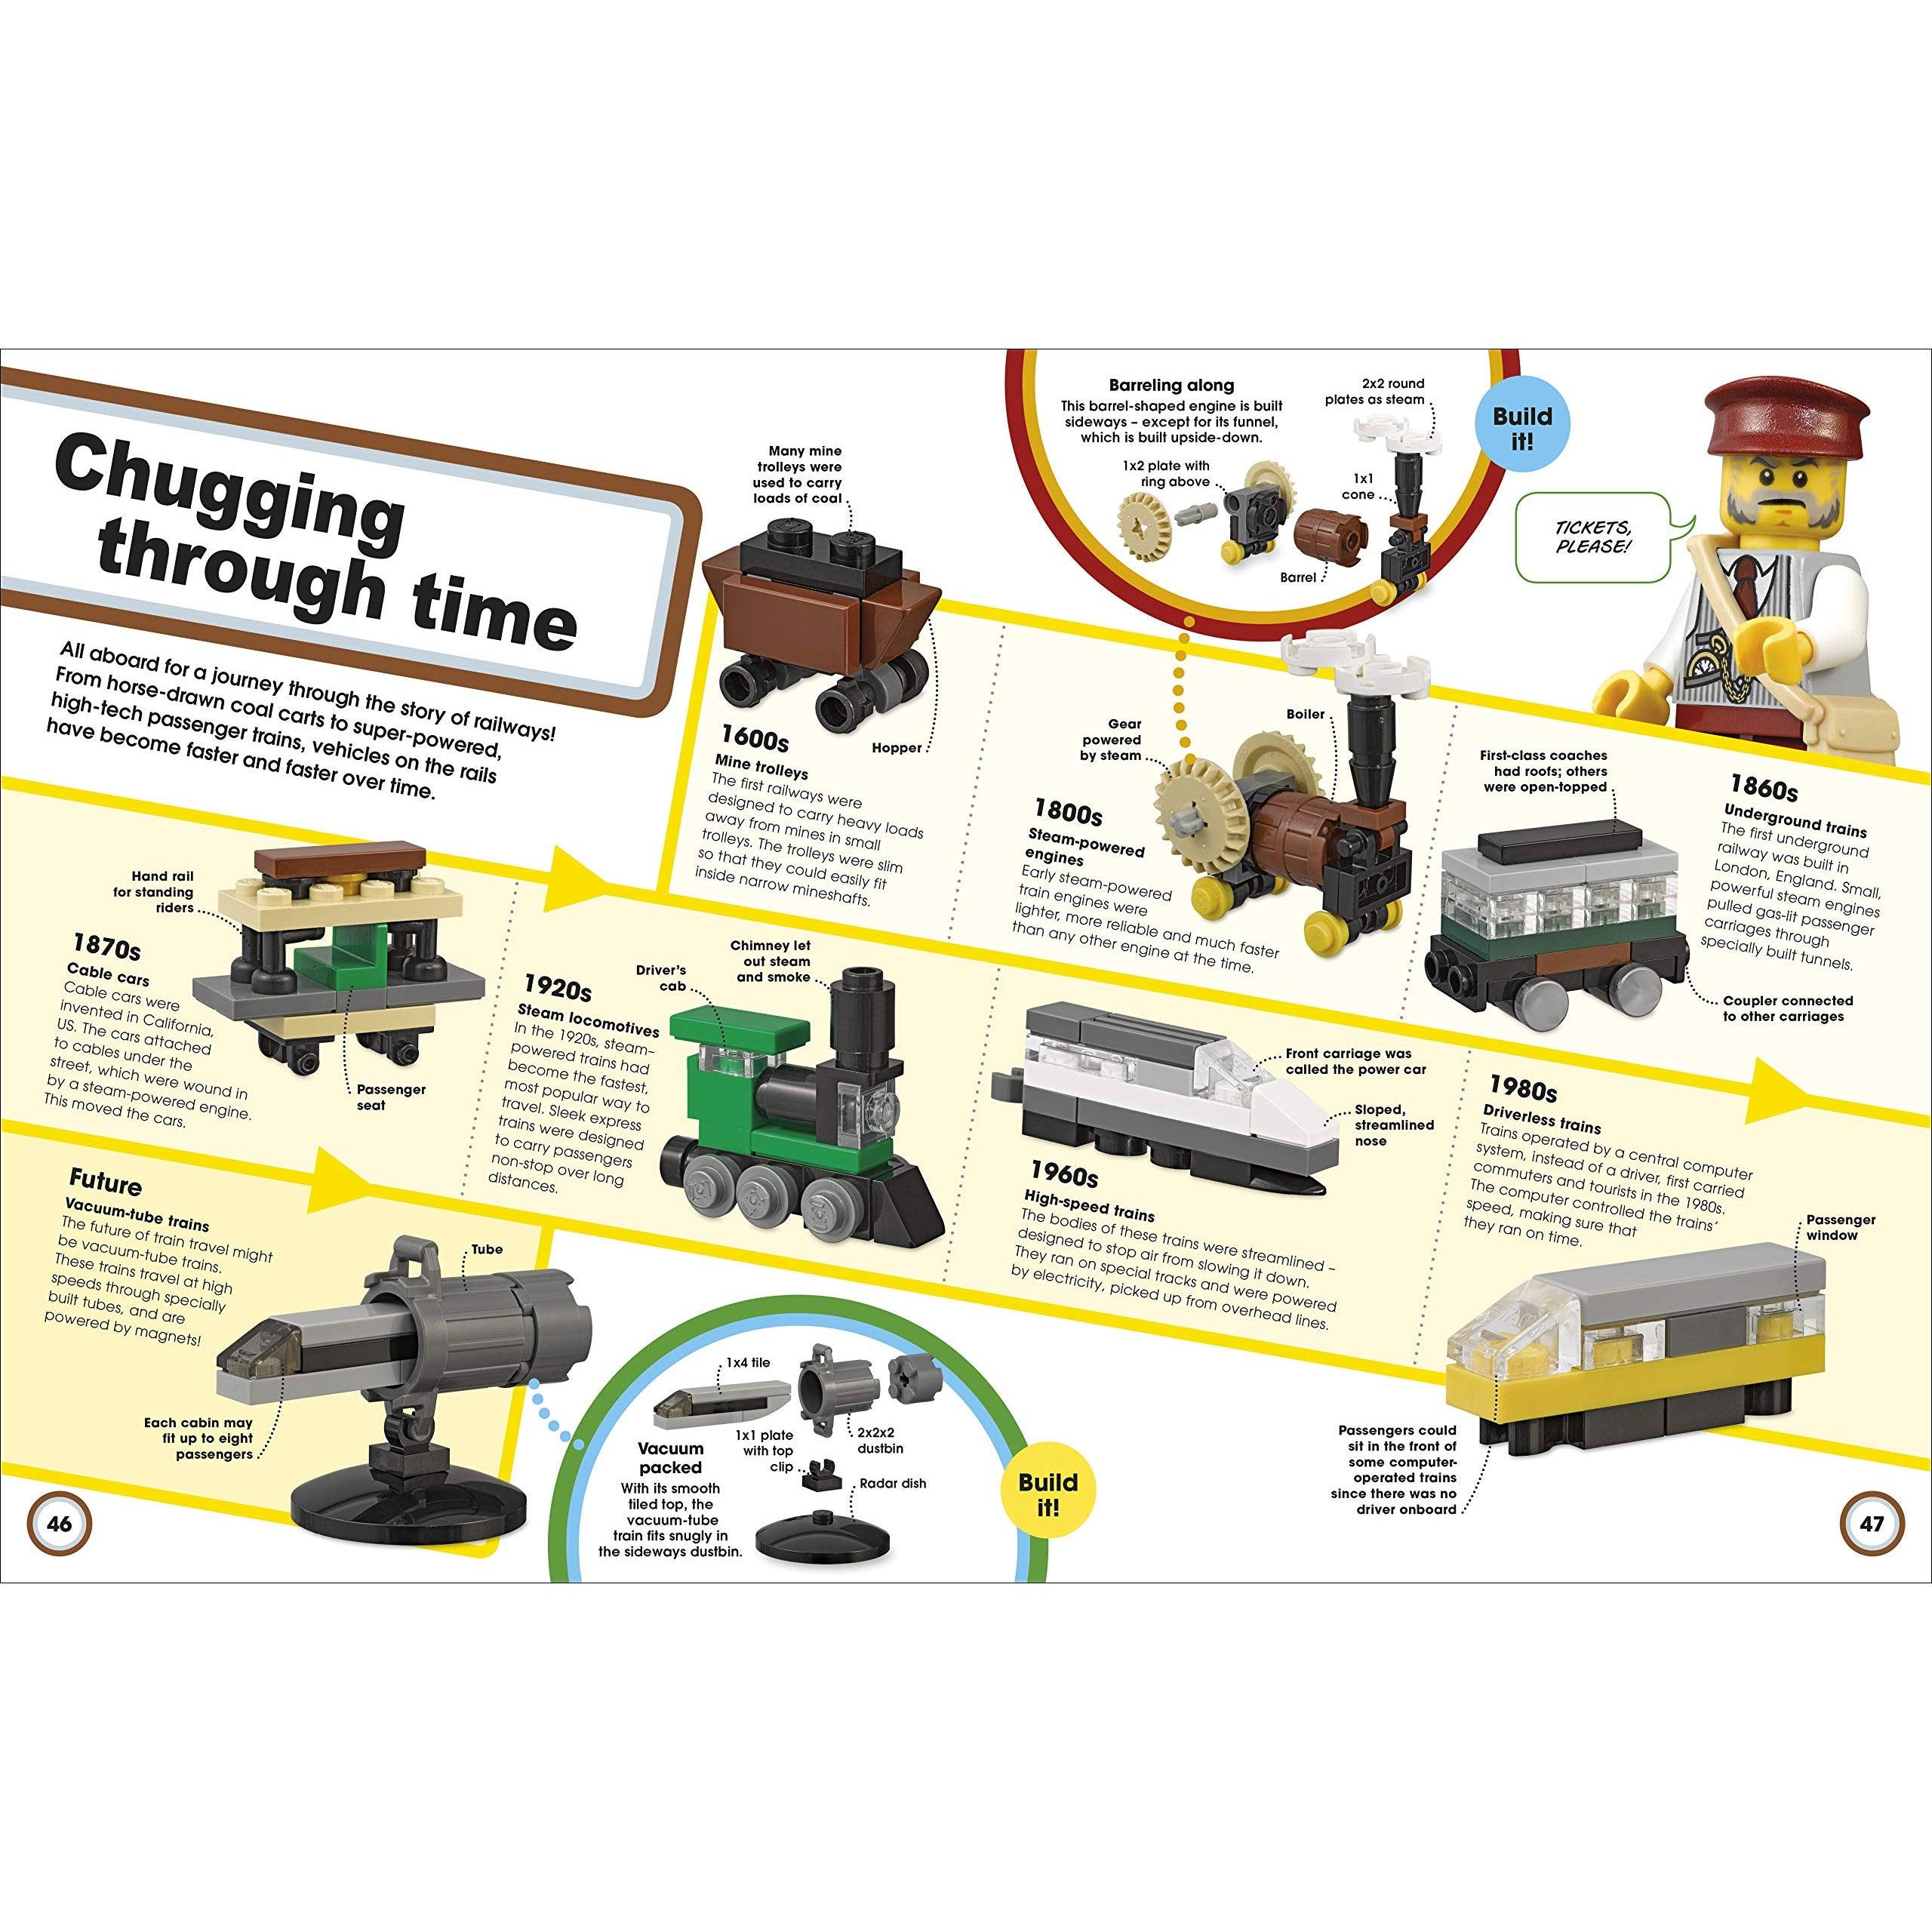 LEGO Amazing Vehicles: Includes Four Exclusive LEGO Mini Models - BumbleToys - 5-7 Years, Books, Boys, Clearance, Educational book, LEGO, OXE, Pre-Order, Technic